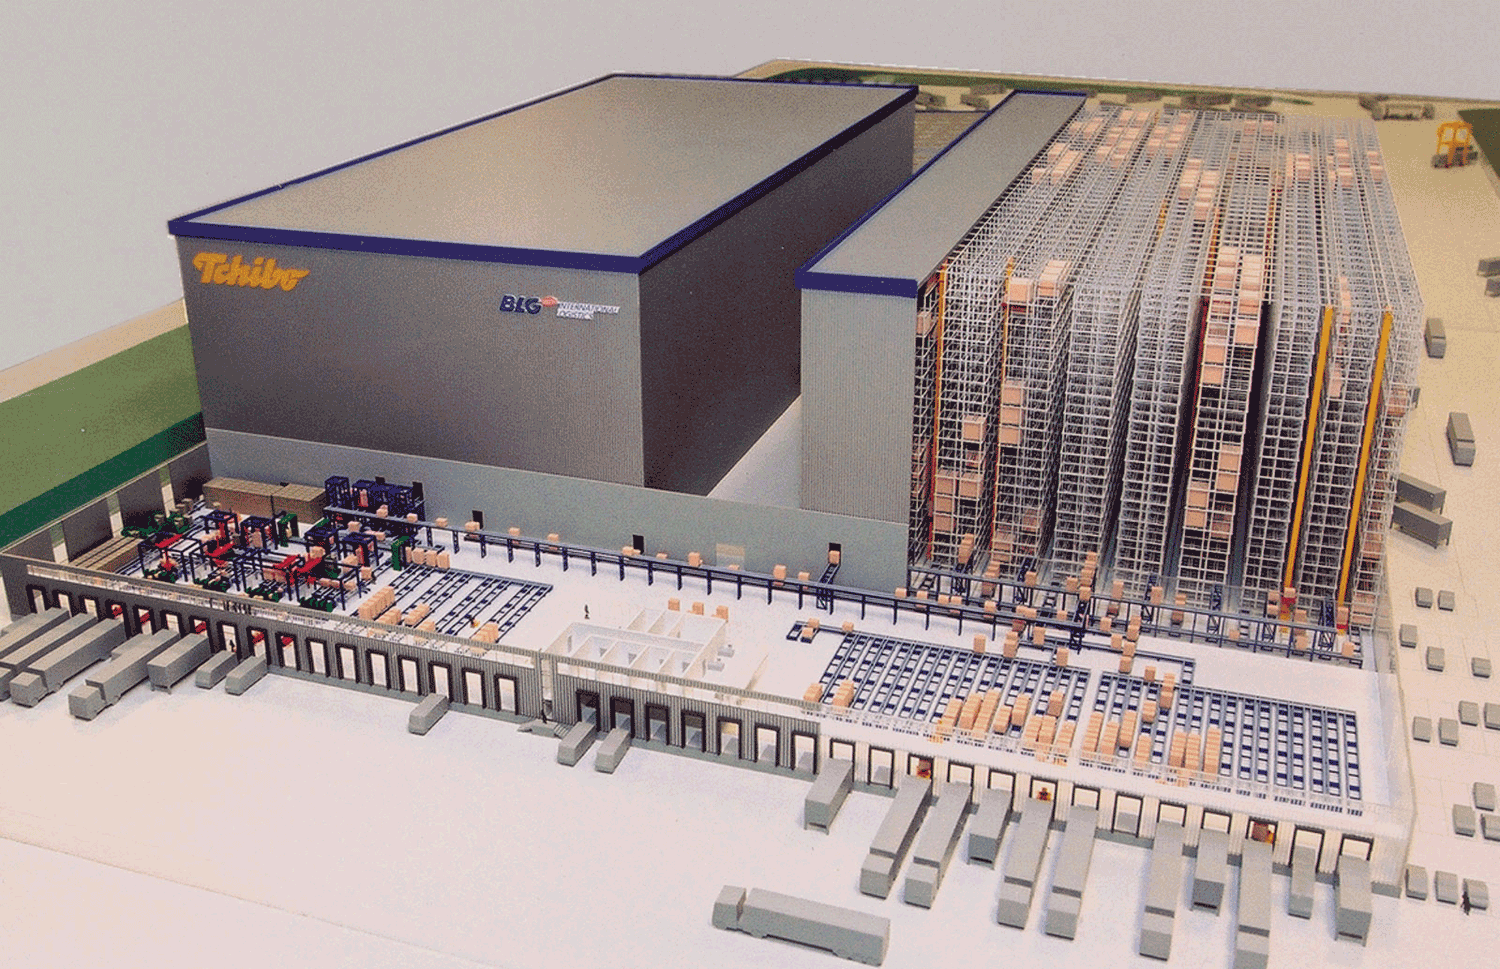 Model with view into Tchibo's high-bay warehouse